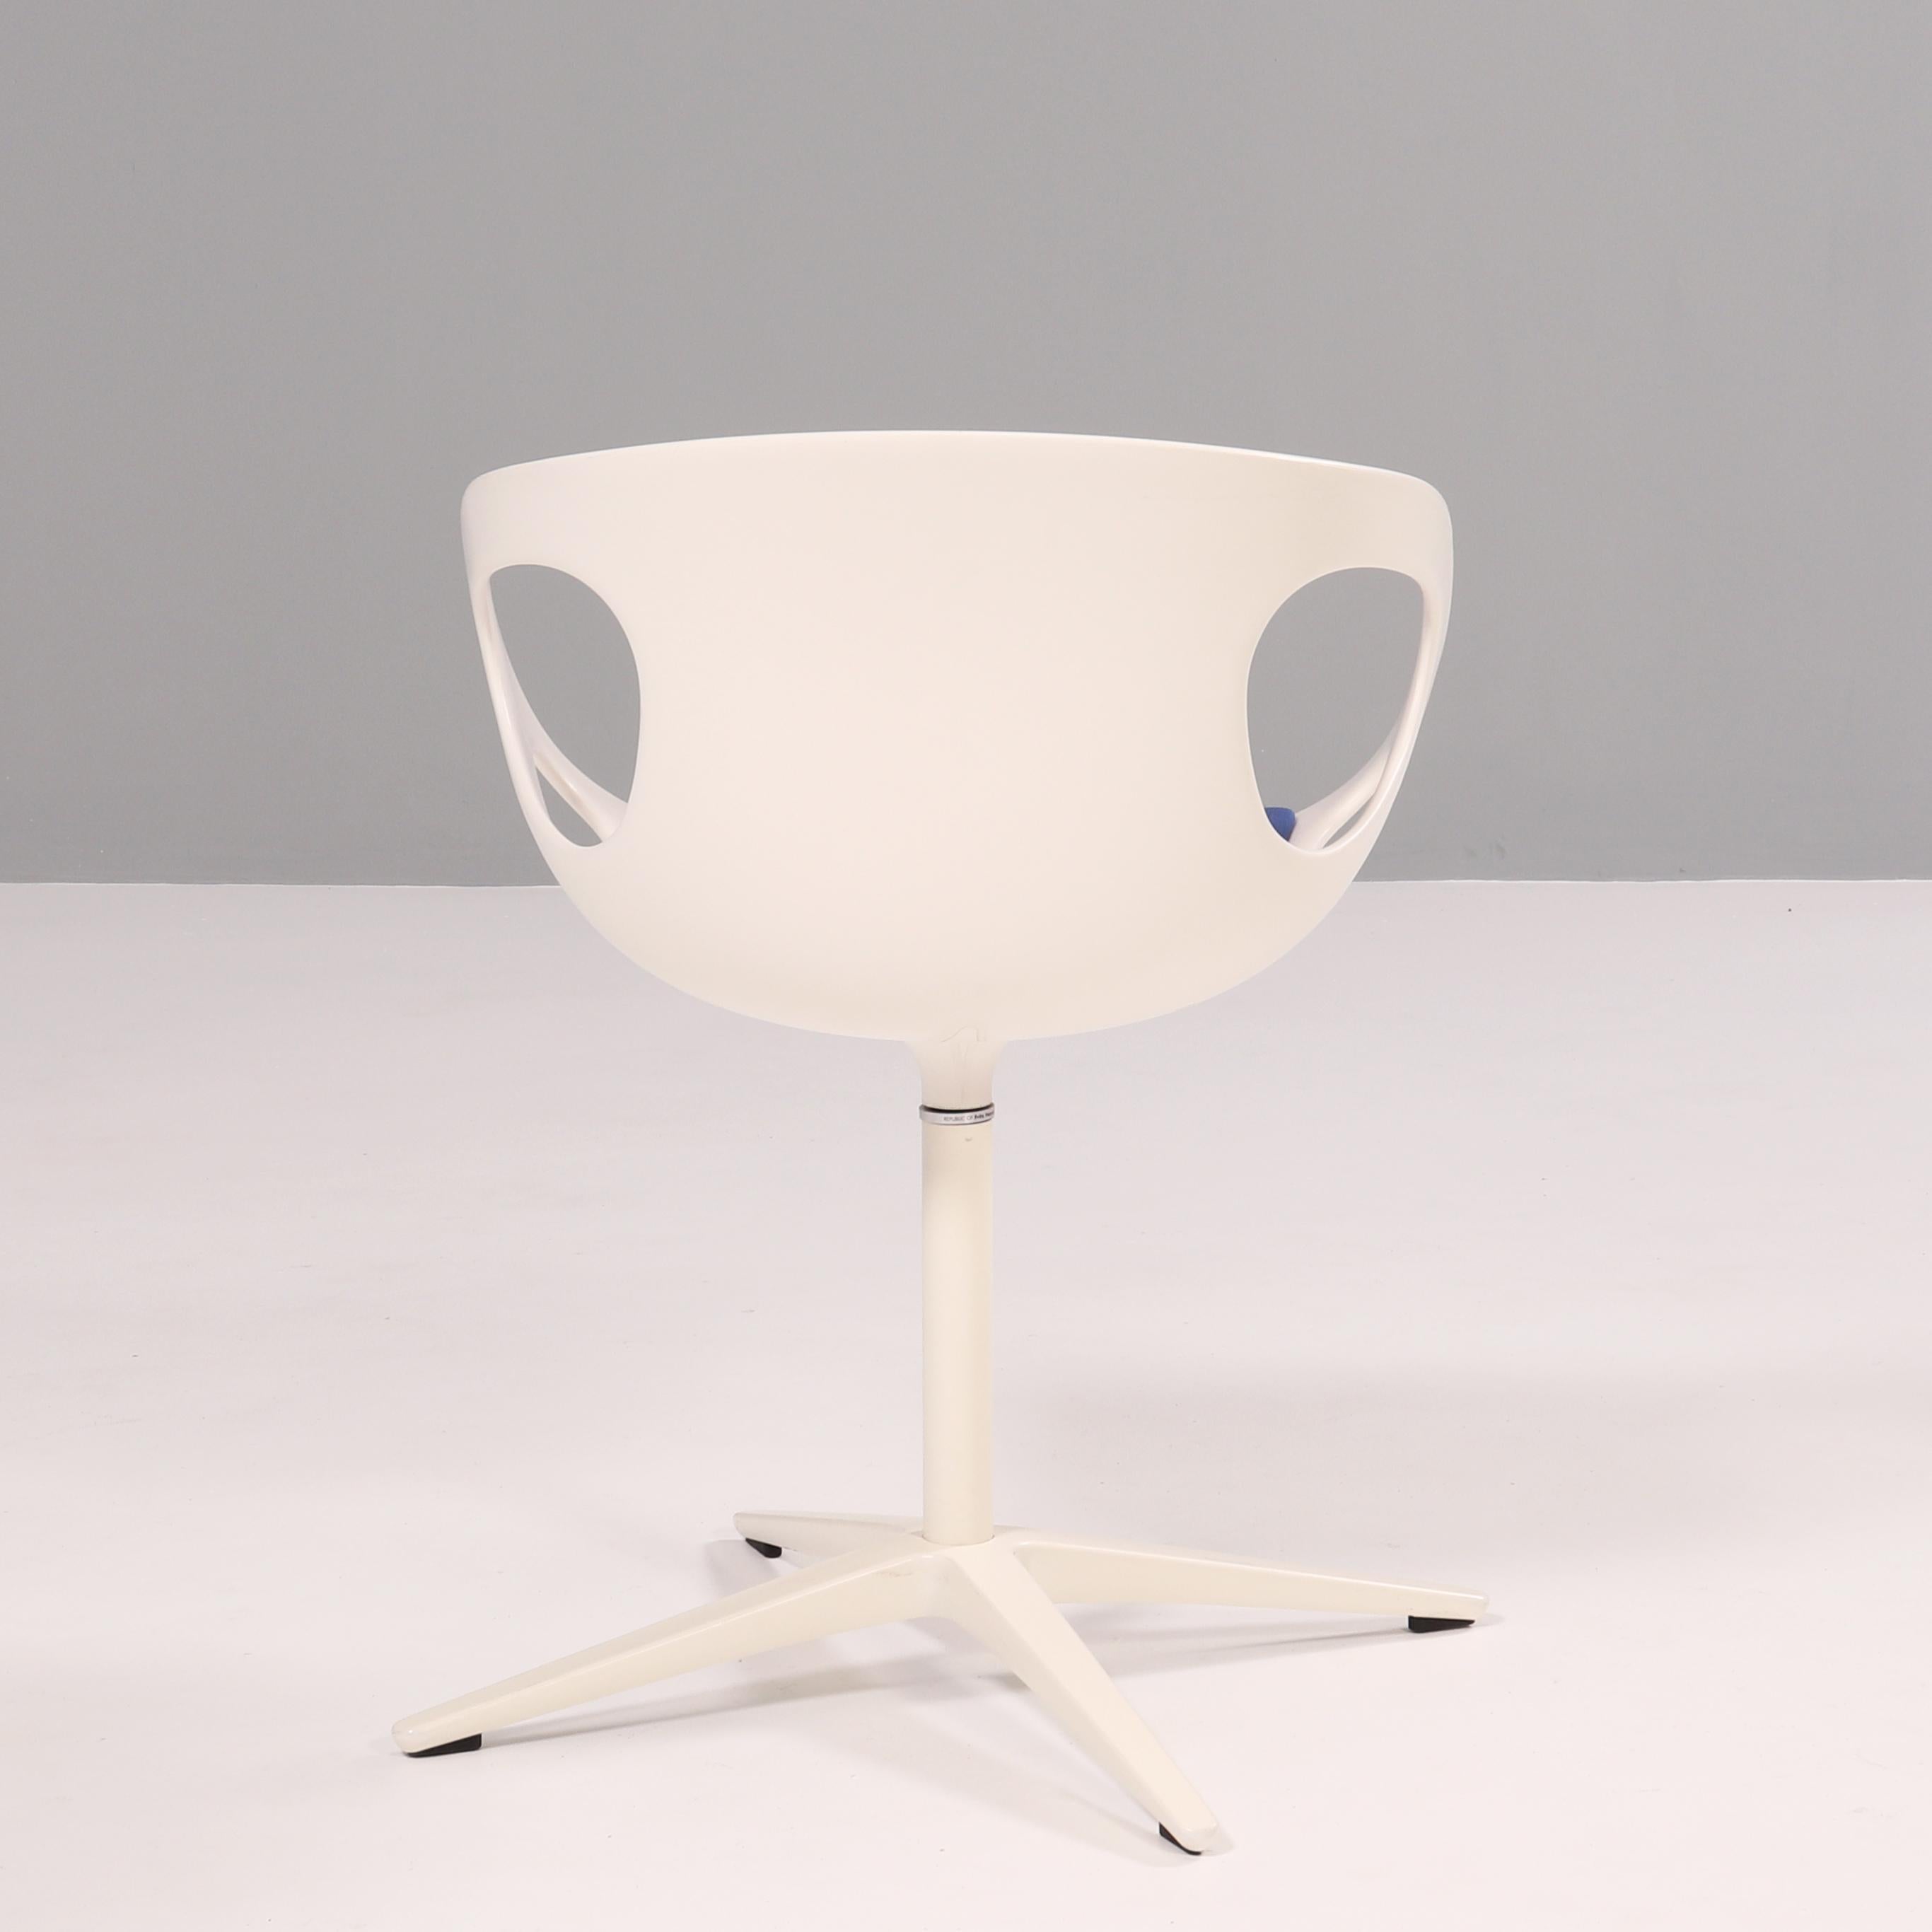 Originally designed in 2009 by Hiromichi Konno for Fritz Hansen, the Rin chair combines Japanese and Danish design traditions to create a classic and elegant piece.

Inspired by the form of a bird’s nest, the chair has a moulded white plastic seat